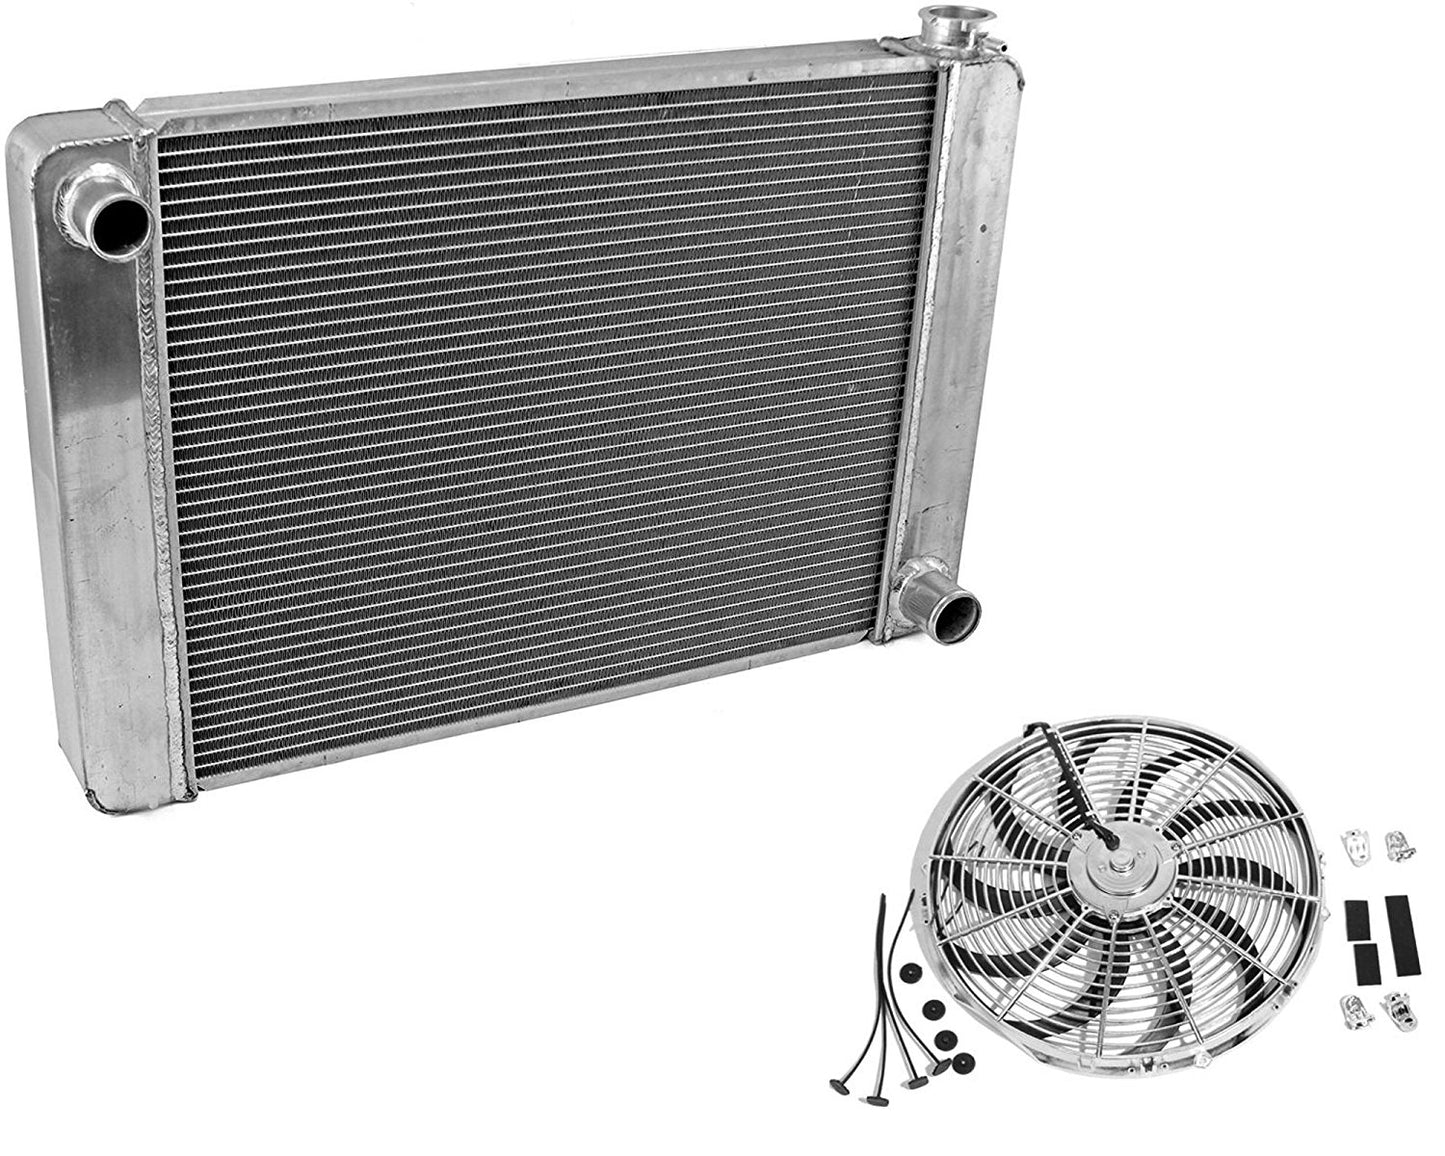 Fabricated Aluminum Radiator 31" x 19" x3" Overall For SBC BBC Chevy GM & 12" Chrome Electric Curved Blade Cooling Fan